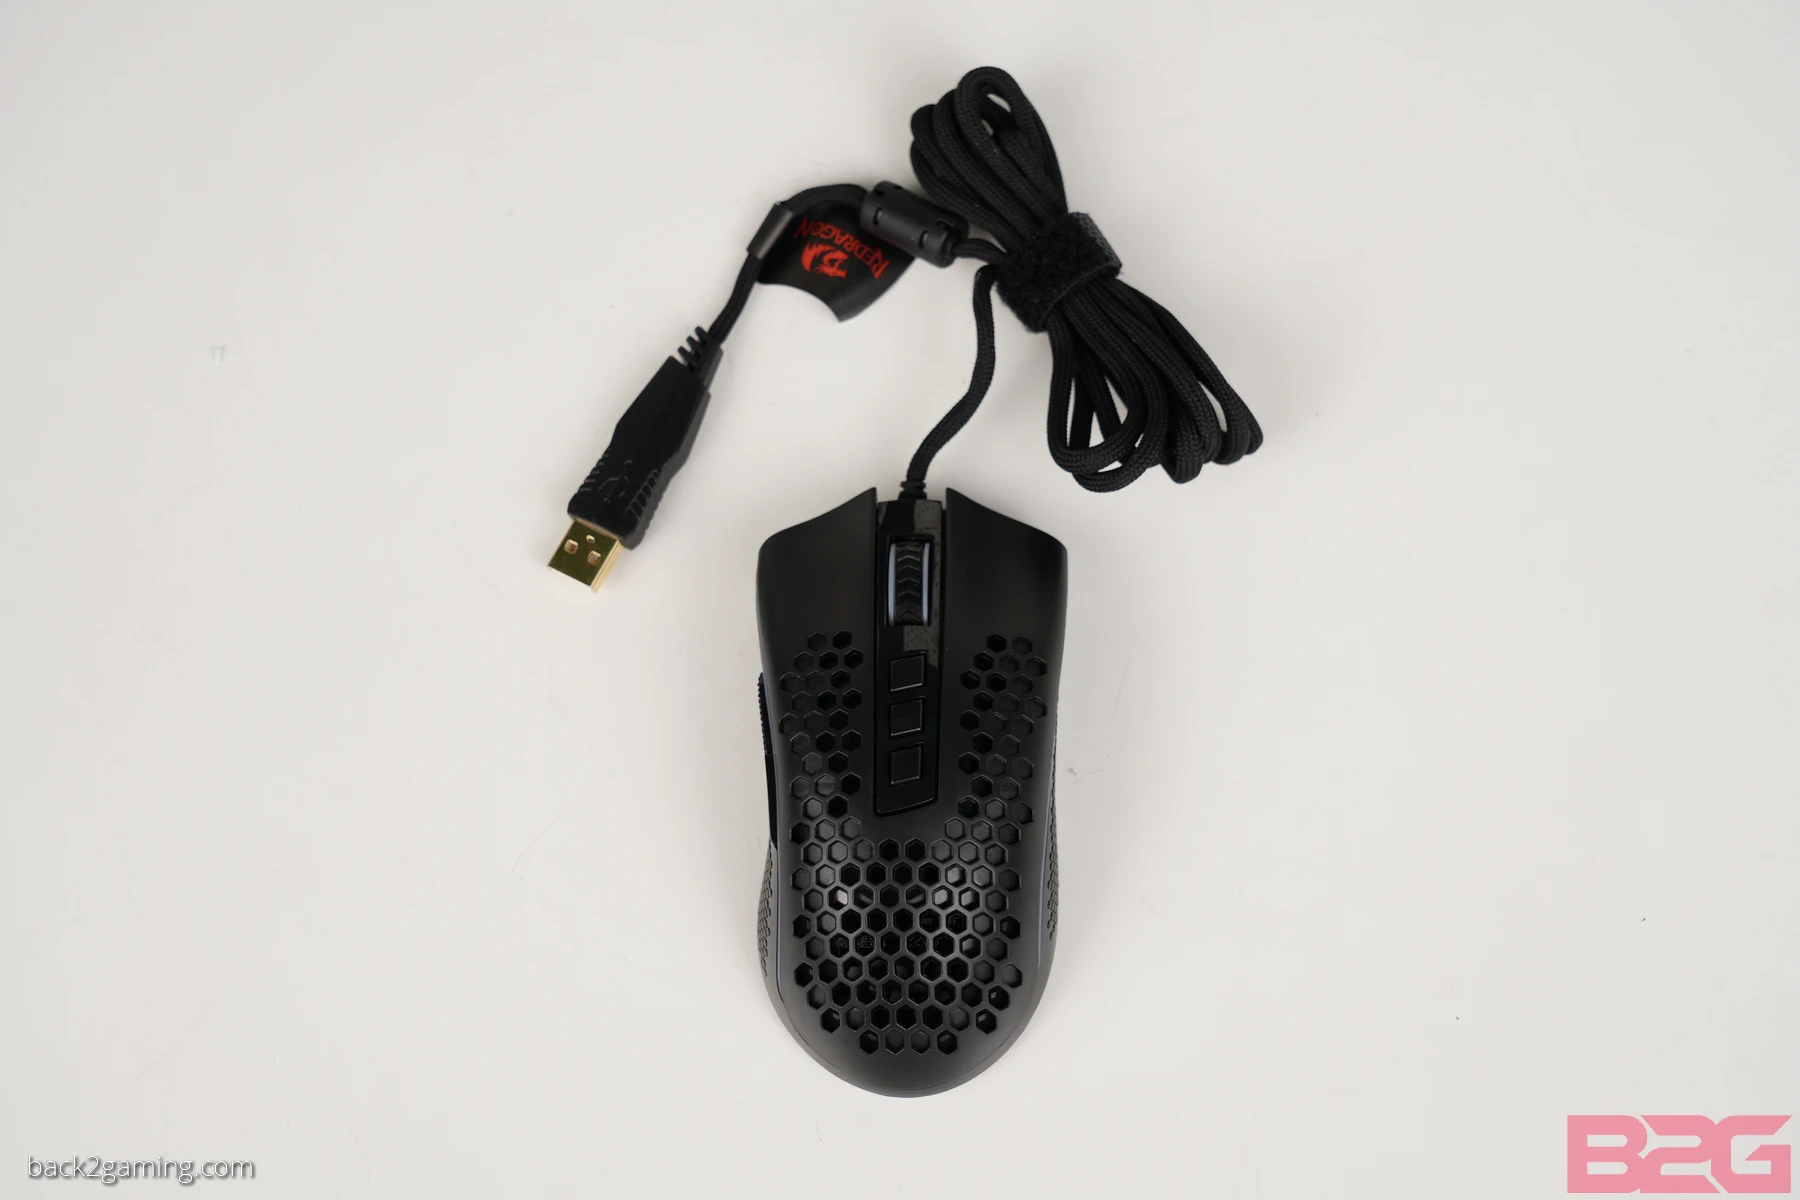 Redragon Storm M808 Gaming Mouse Review - returnal